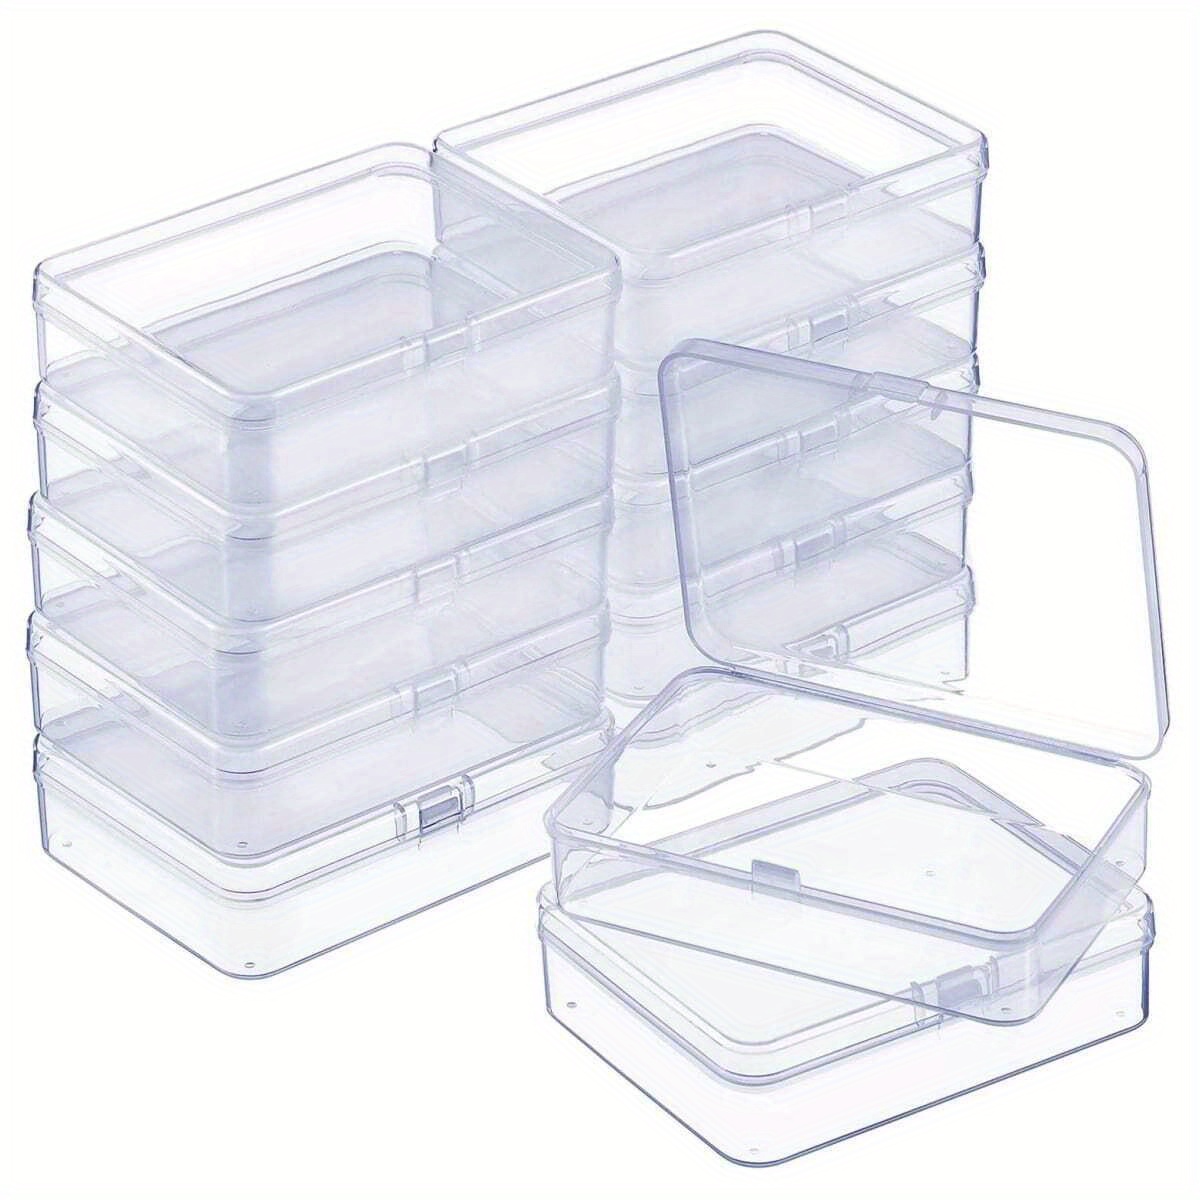  Small Plastic Storage Containers